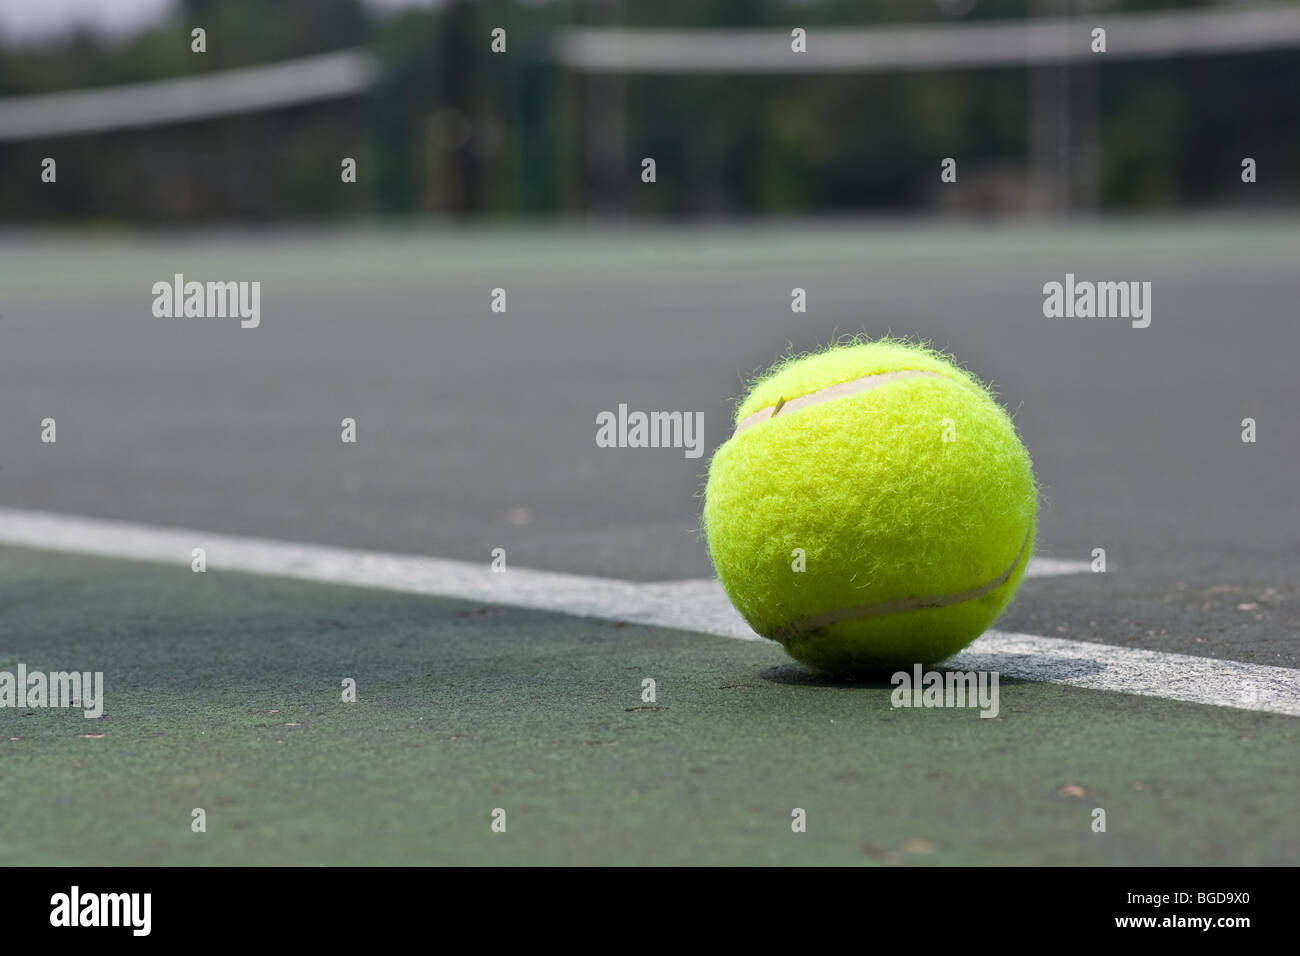 A closeup of a yellow tennis ball just outside of the base line on an asphalt tennis court. Stock Photo